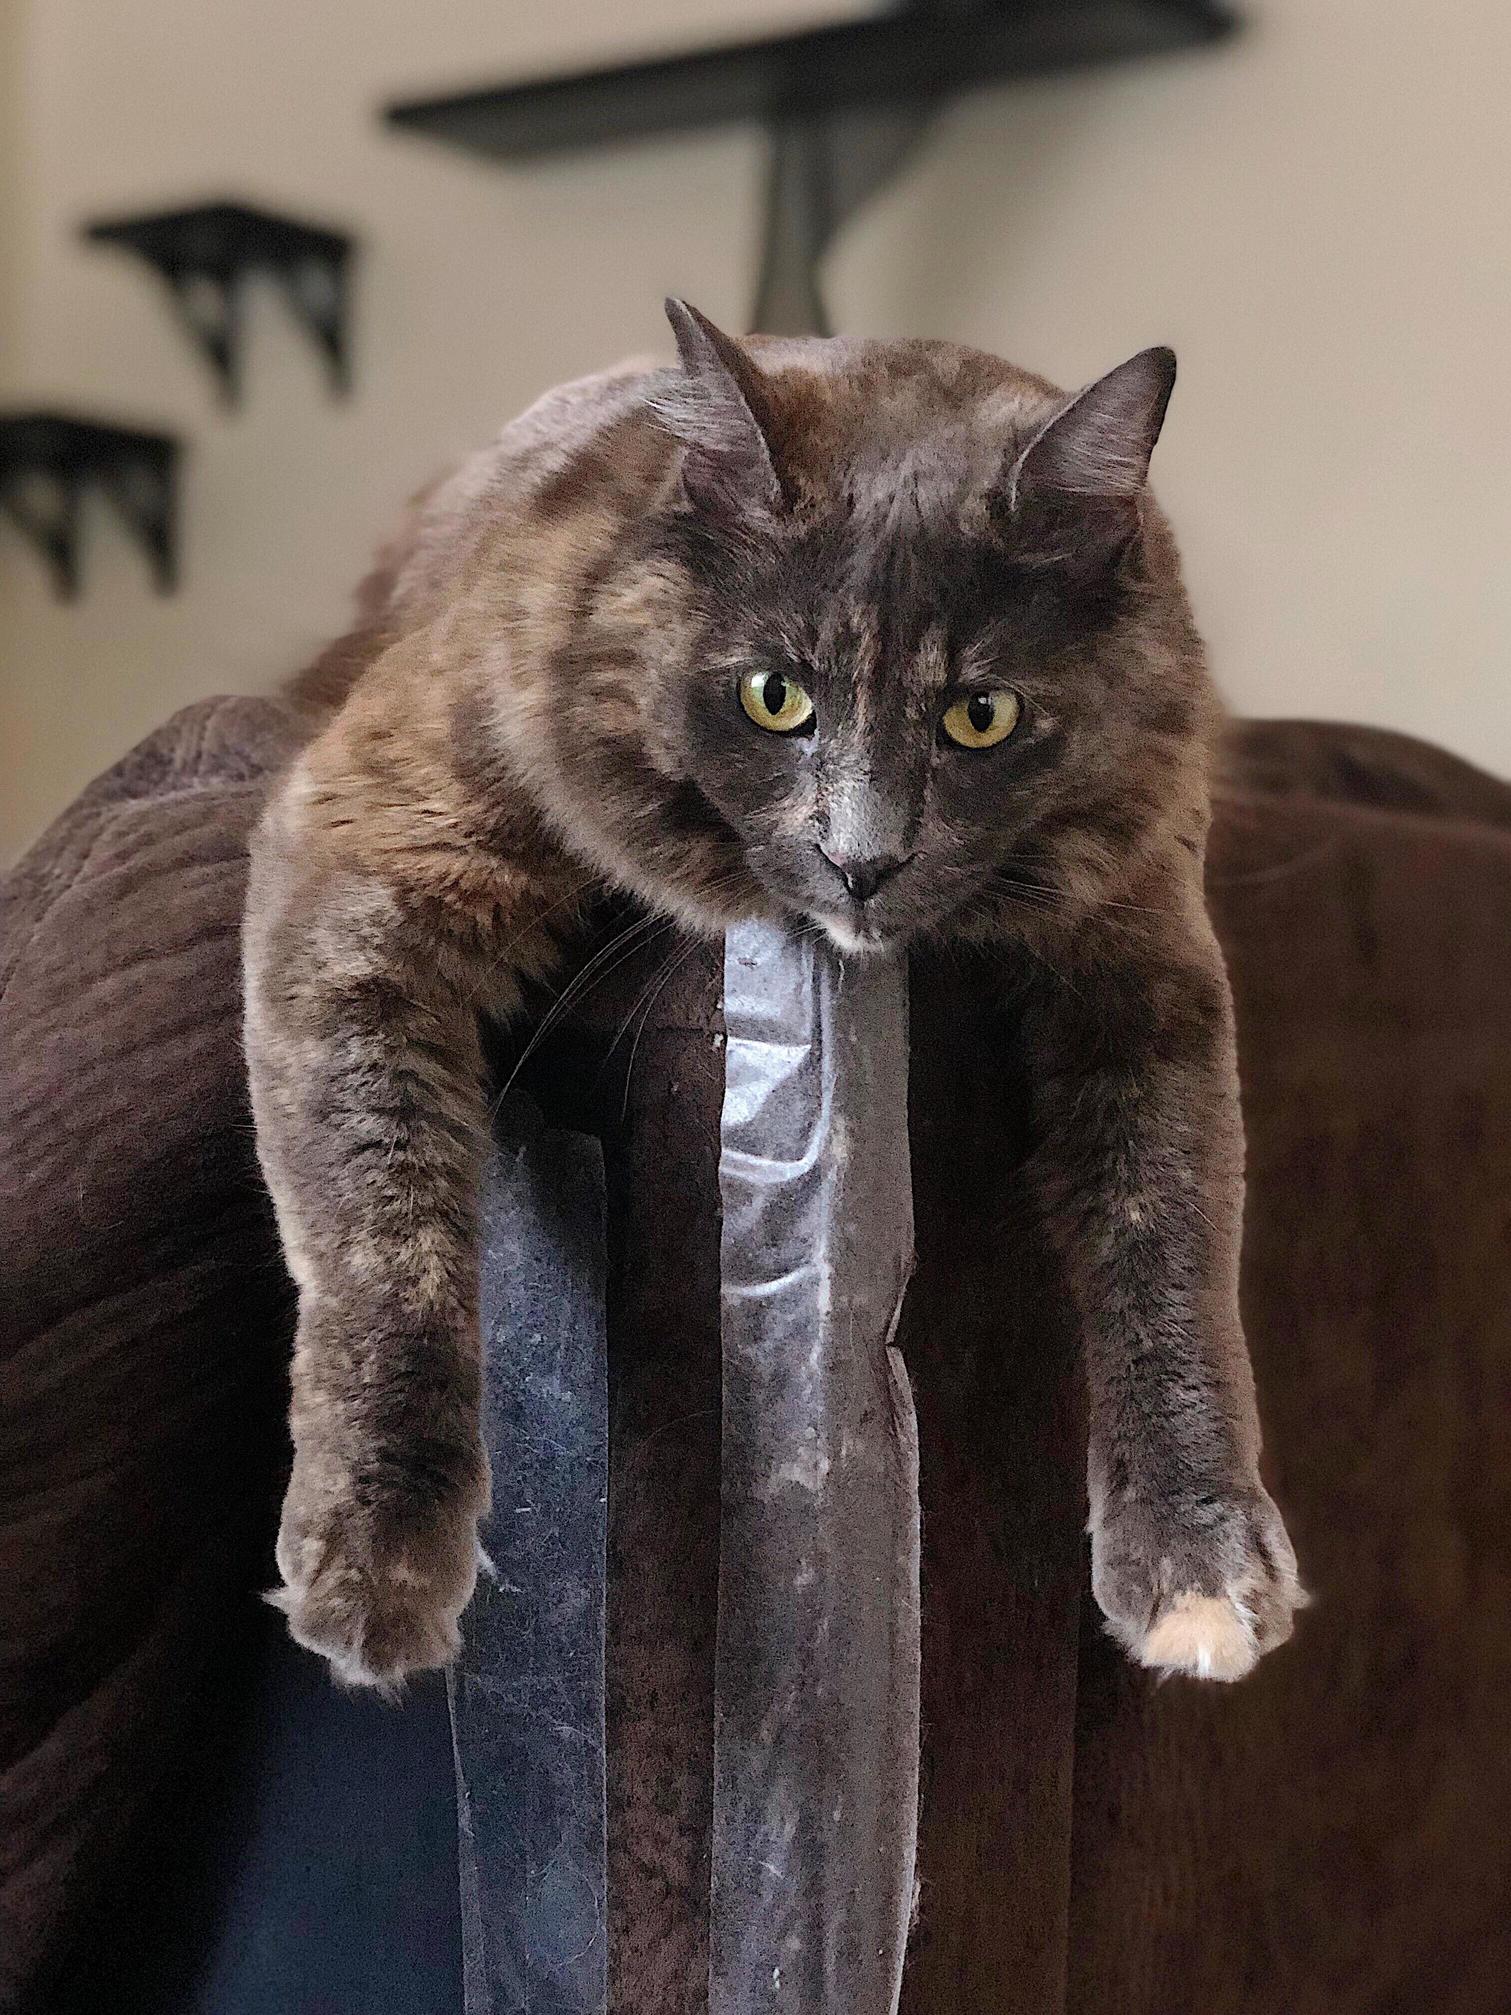 Meet maya, 2.5 yr old dilute tortie ragamuffin, this is her favorite way to lounge on the couch